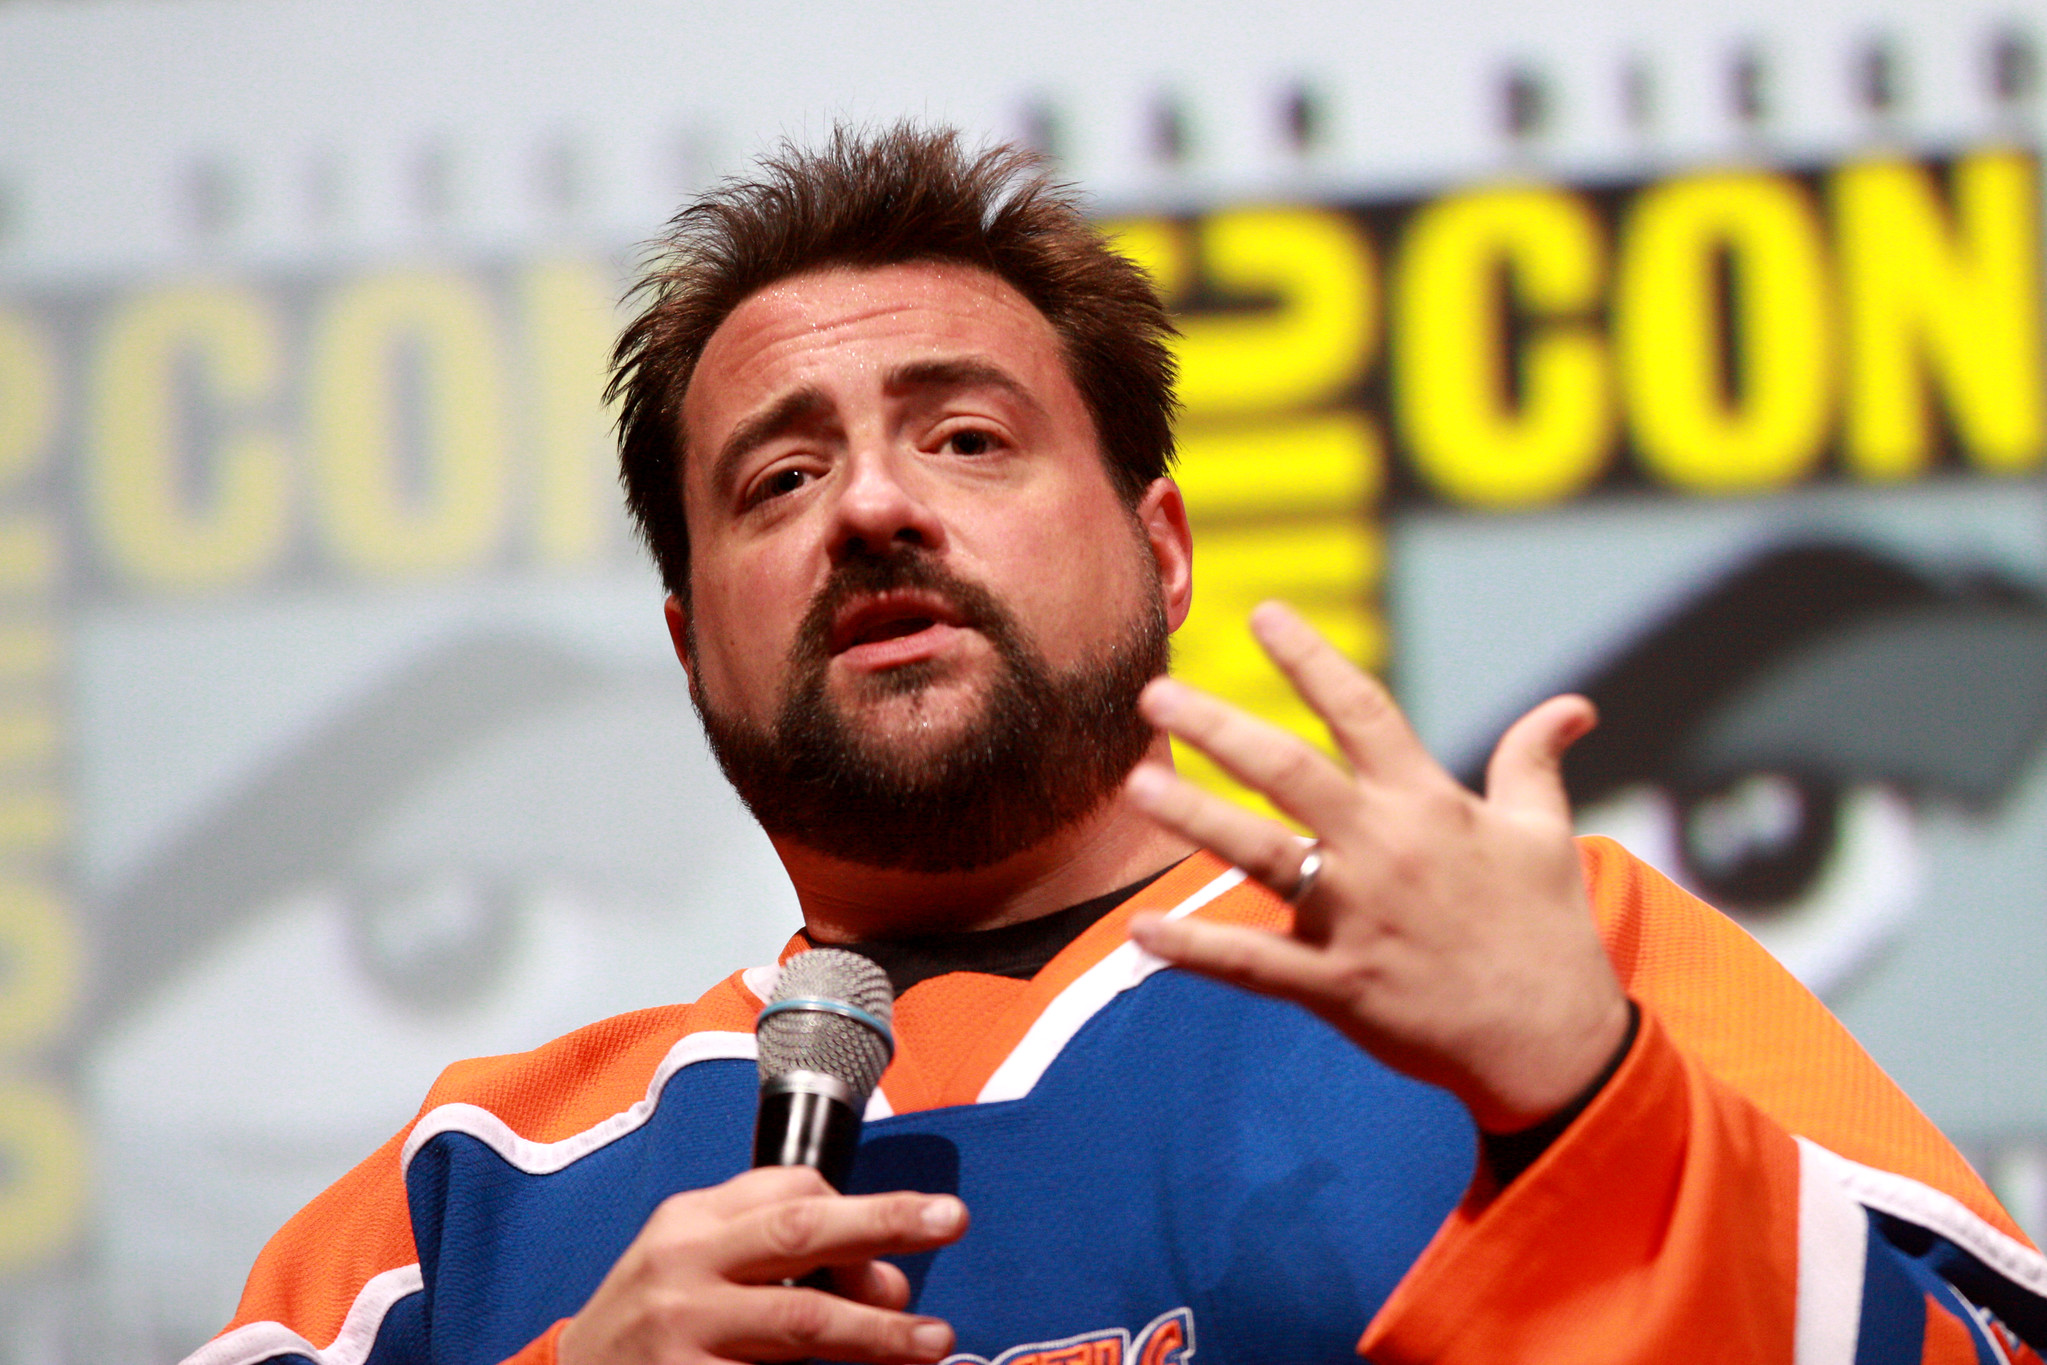 A Definitive Ranking Of Kevin Smith’s Movies - Your Entertainment Central